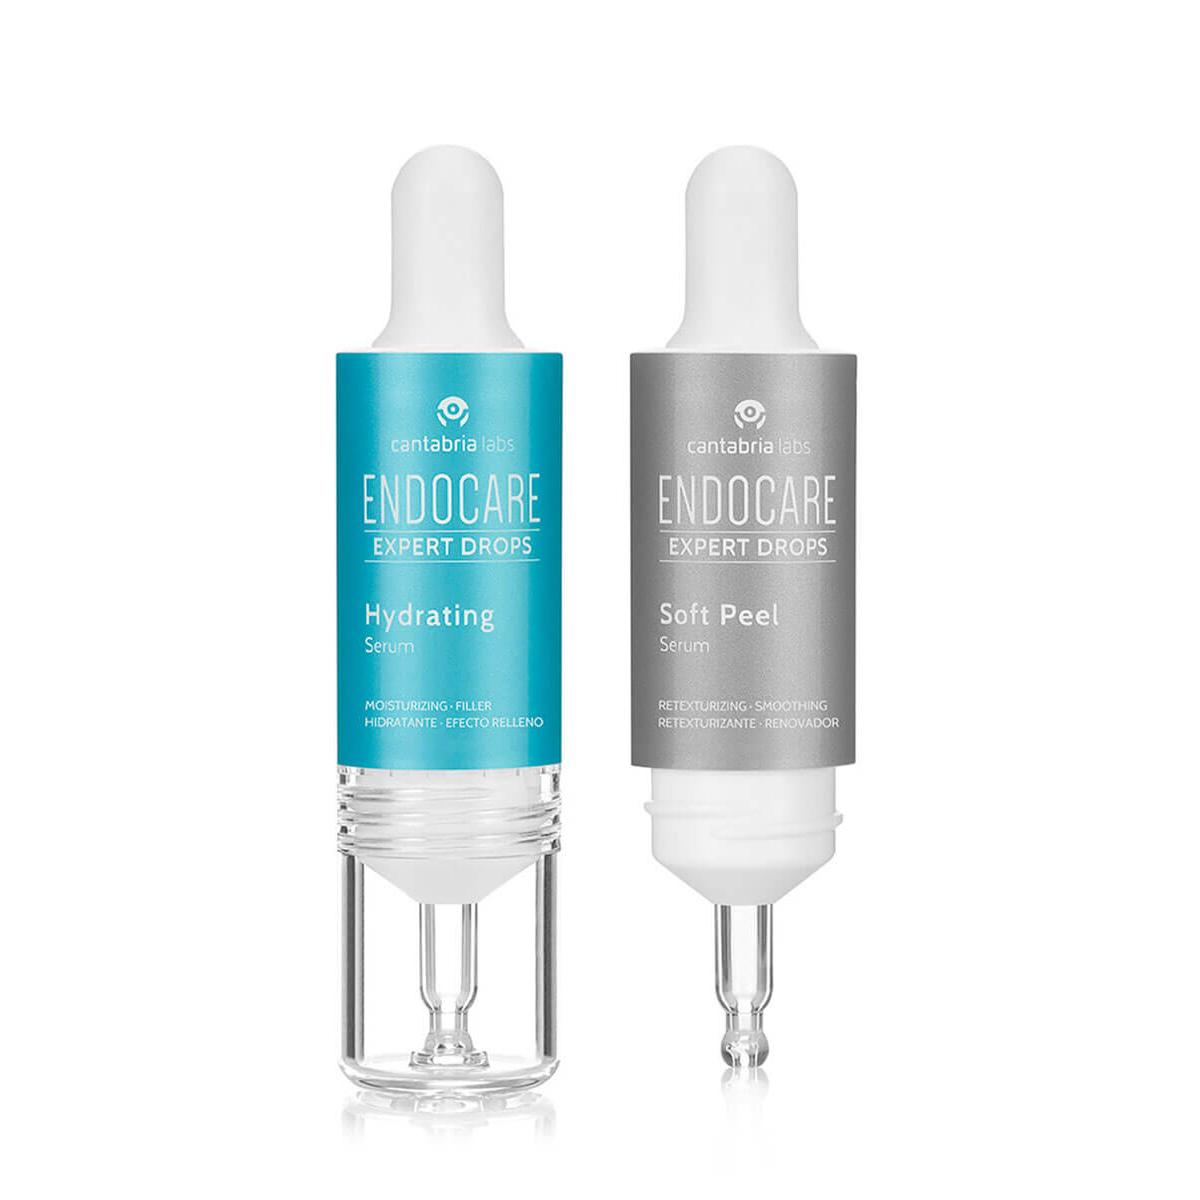 Endocare - Endocare expert drops hydratating protocol 2x10ml